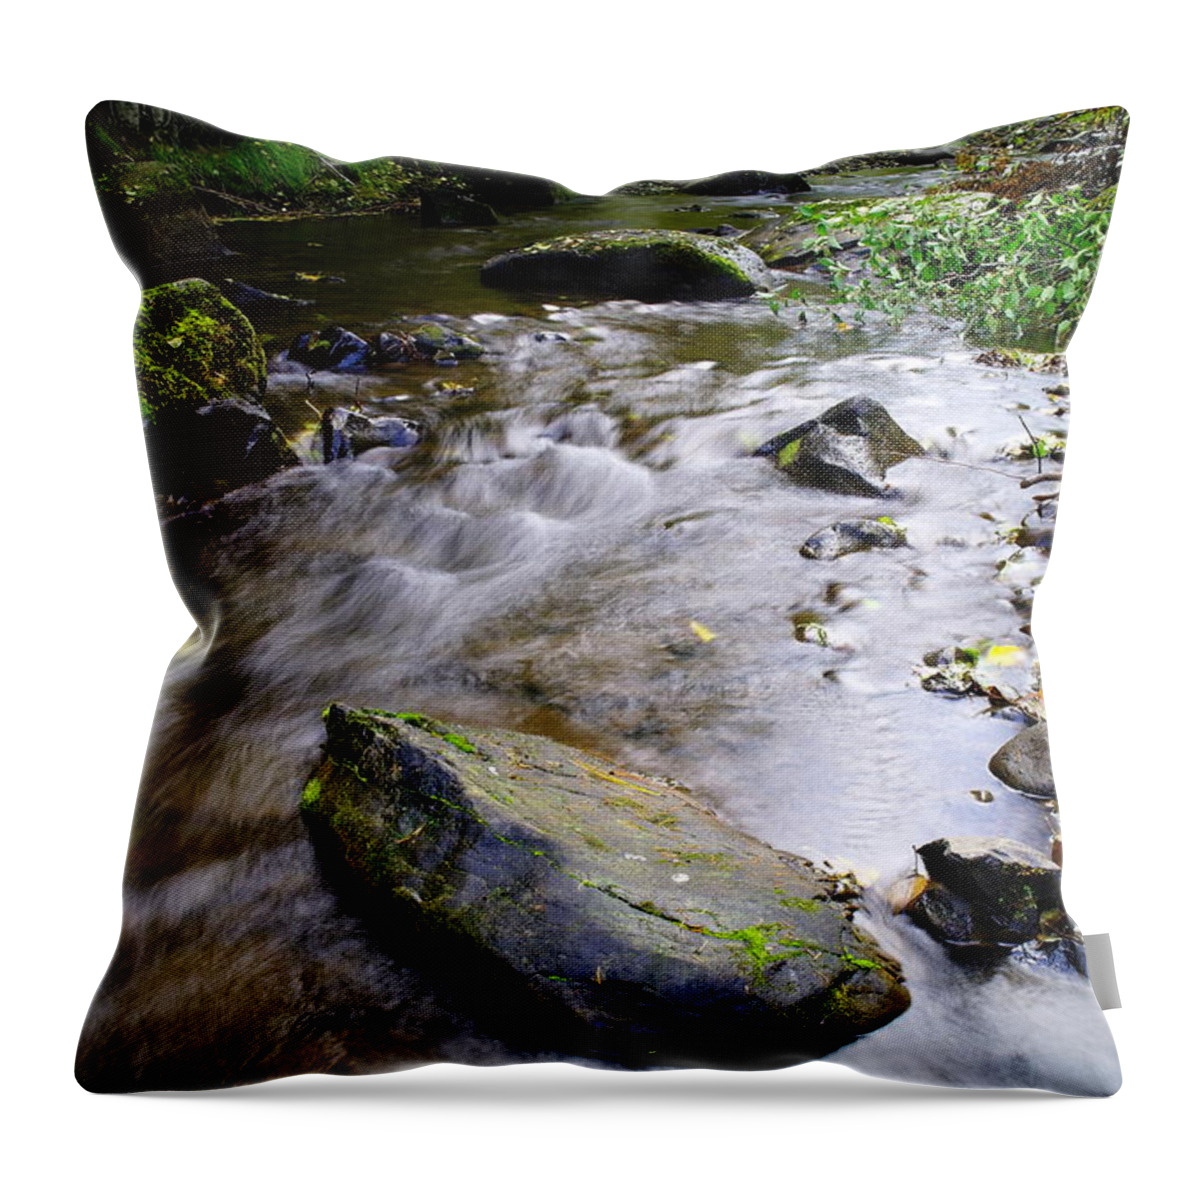 Creeks Throw Pillow featuring the photograph Satus Creek In Autumn by Jeff Swan